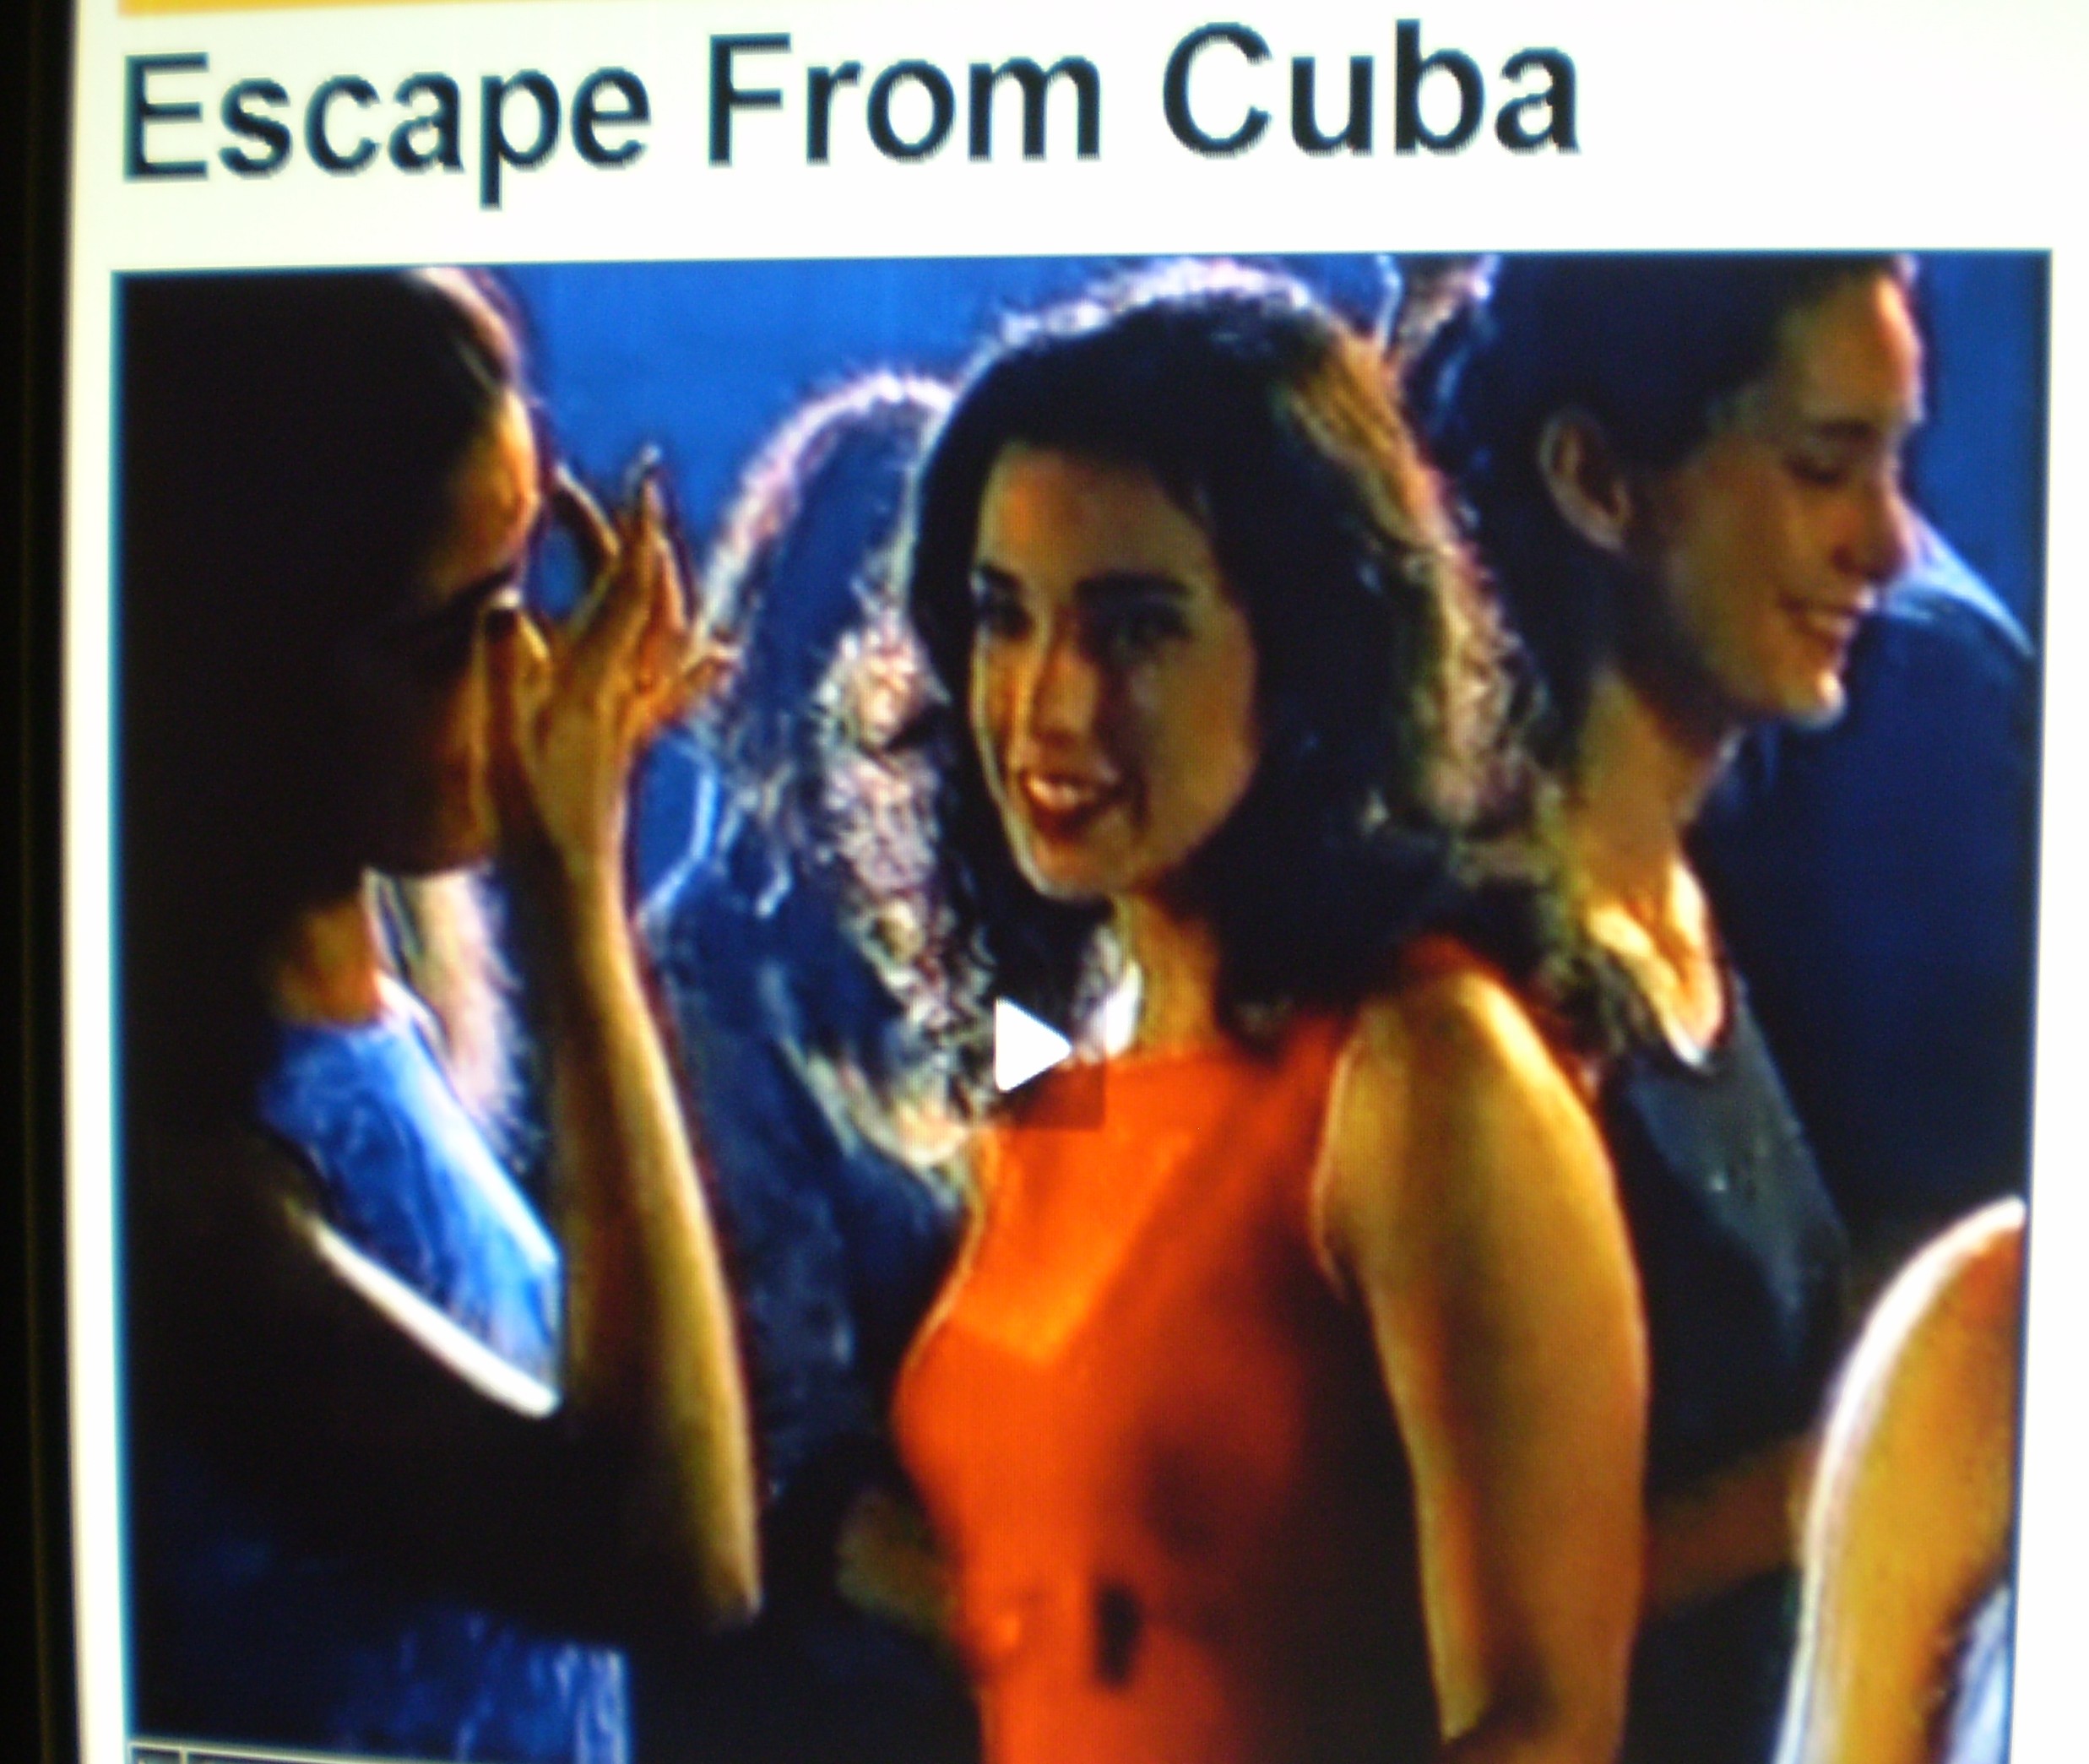 Deborah Smith Ford and others on set of Escape From Cuba (2003)